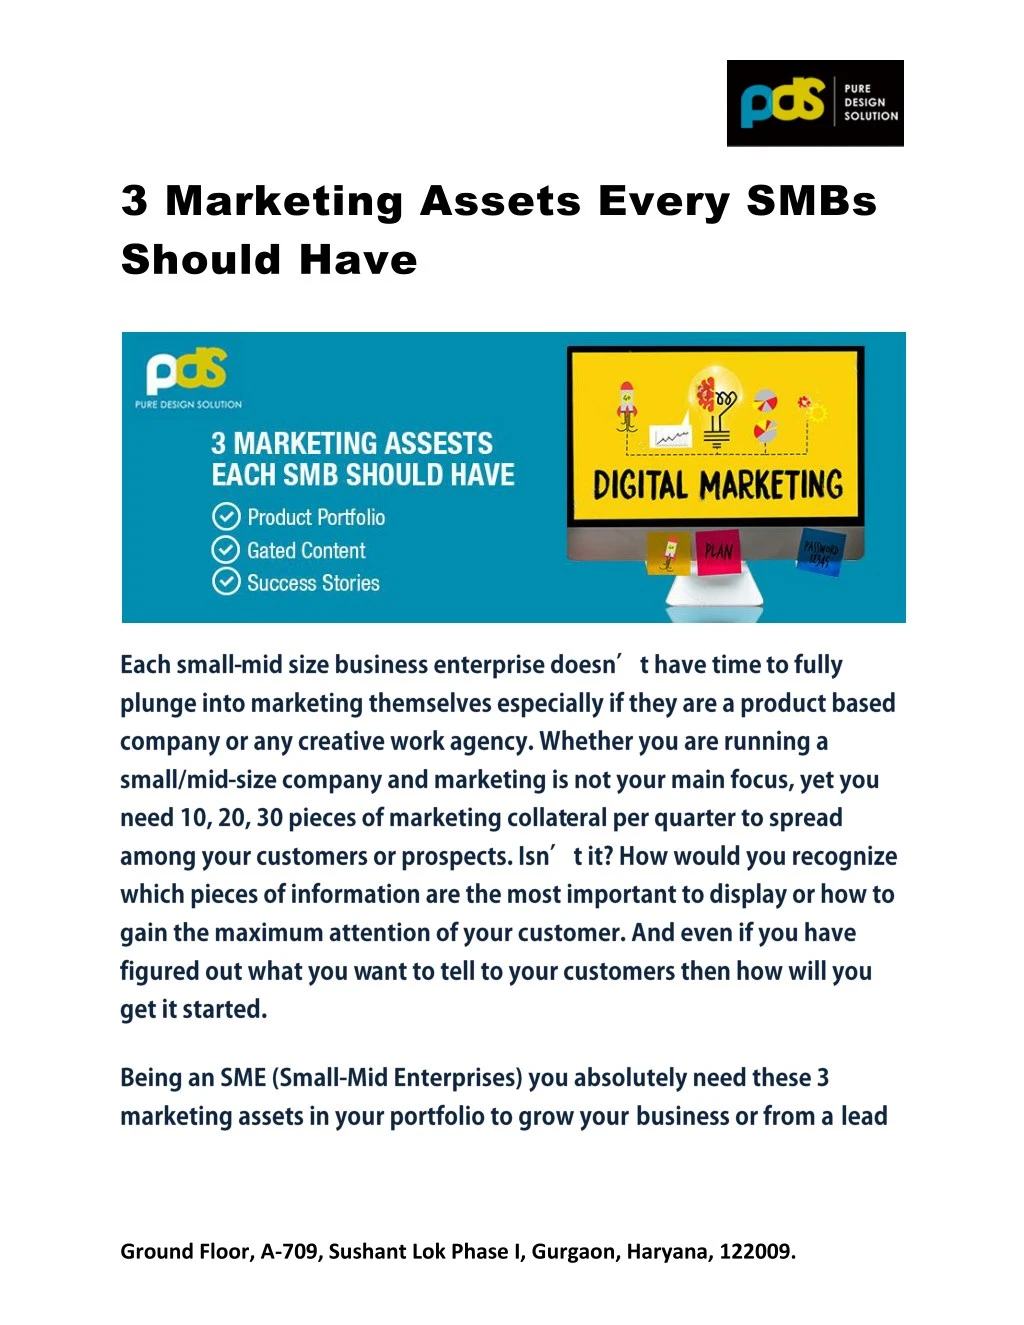 3 marketing assets every smbs should have